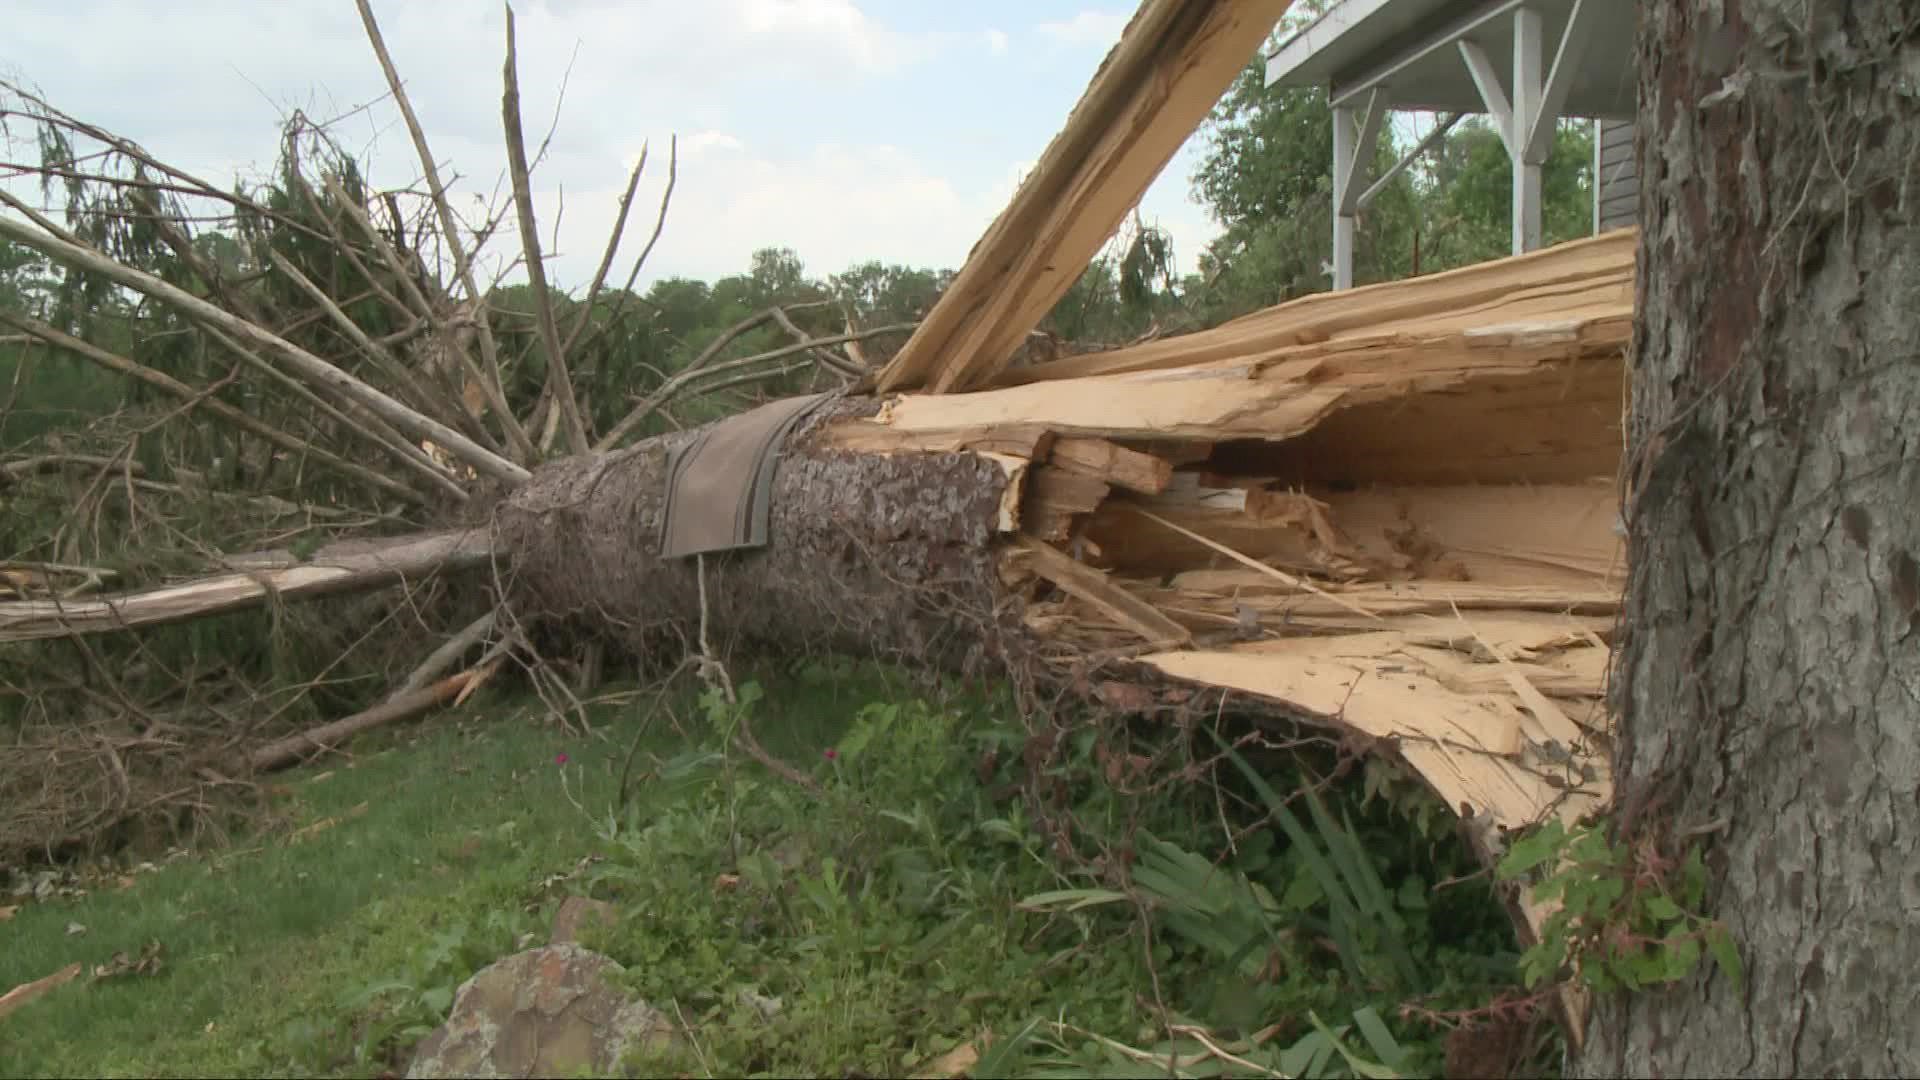 Many residents to the south of Cleveland are still without power after Monday's severe weather. Richland, Wayne, and Holmes counties are most affected.